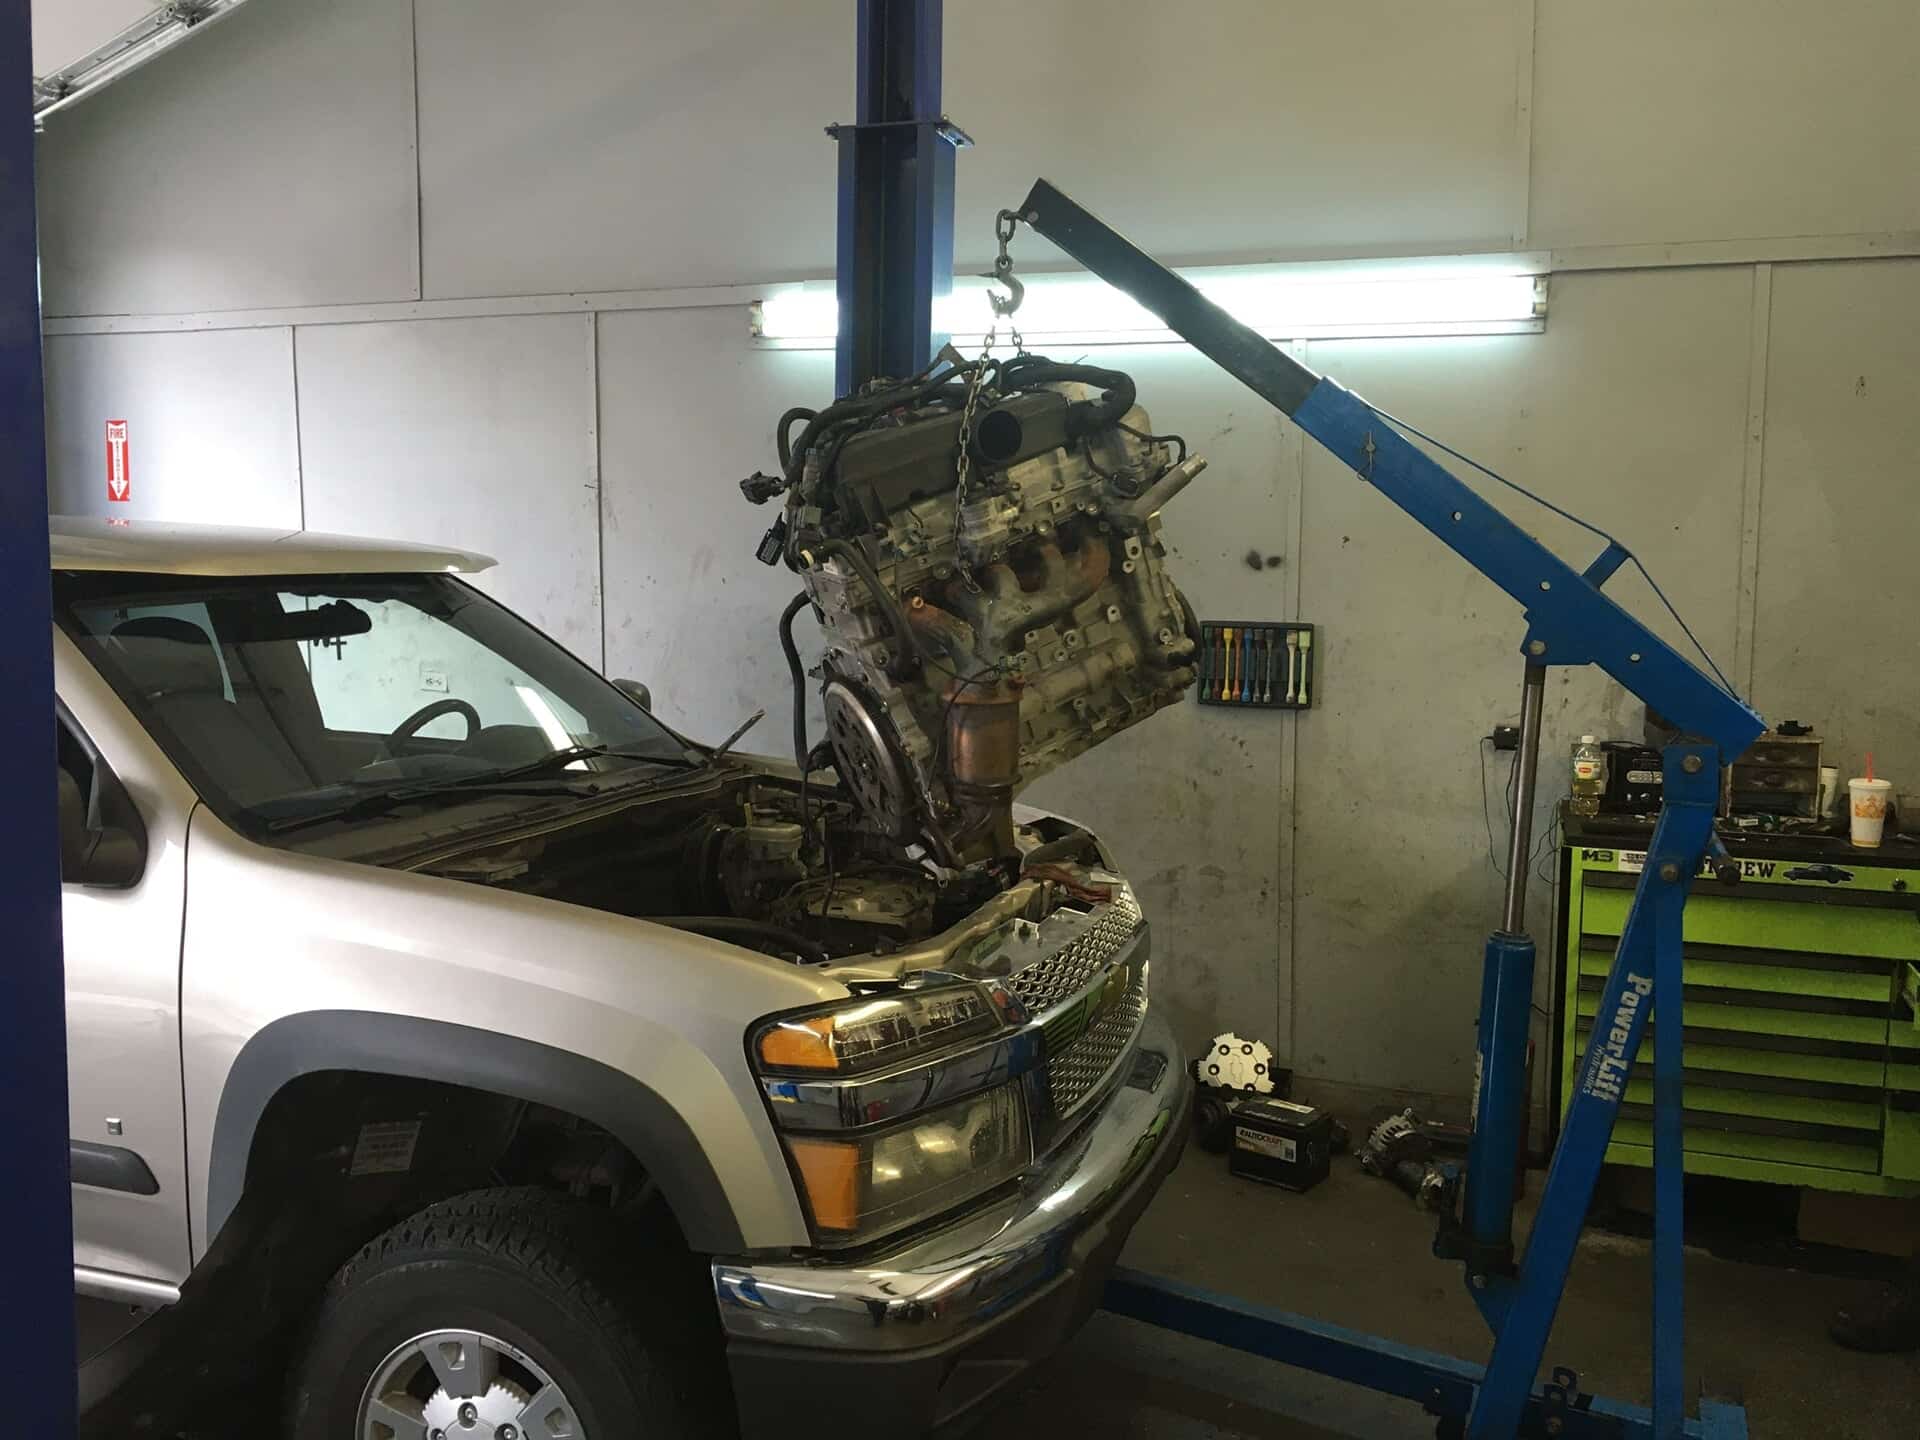 All models engine repairing at bland street auto